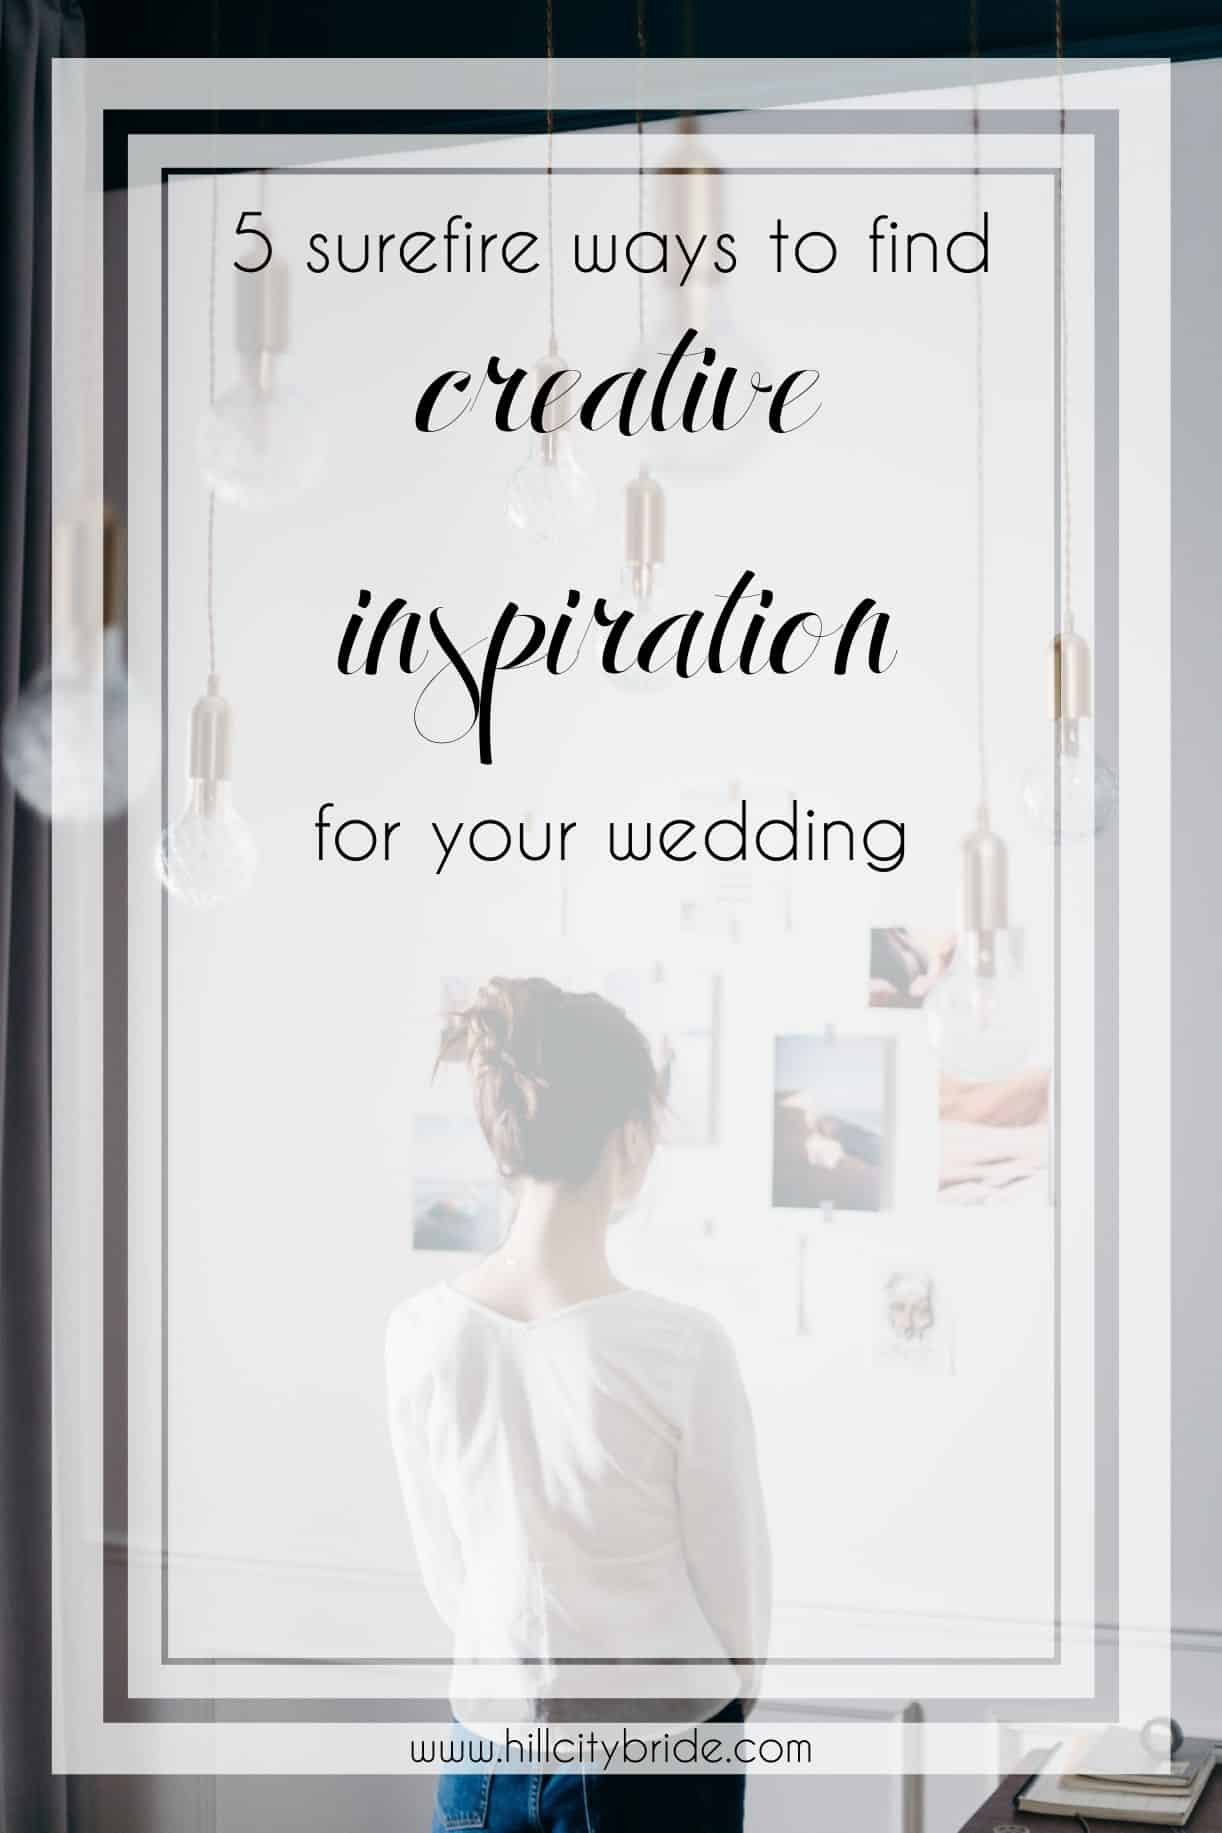 5 Surefire Ways to Find Creative Inspiration for Your Wedding | Hill City Bride